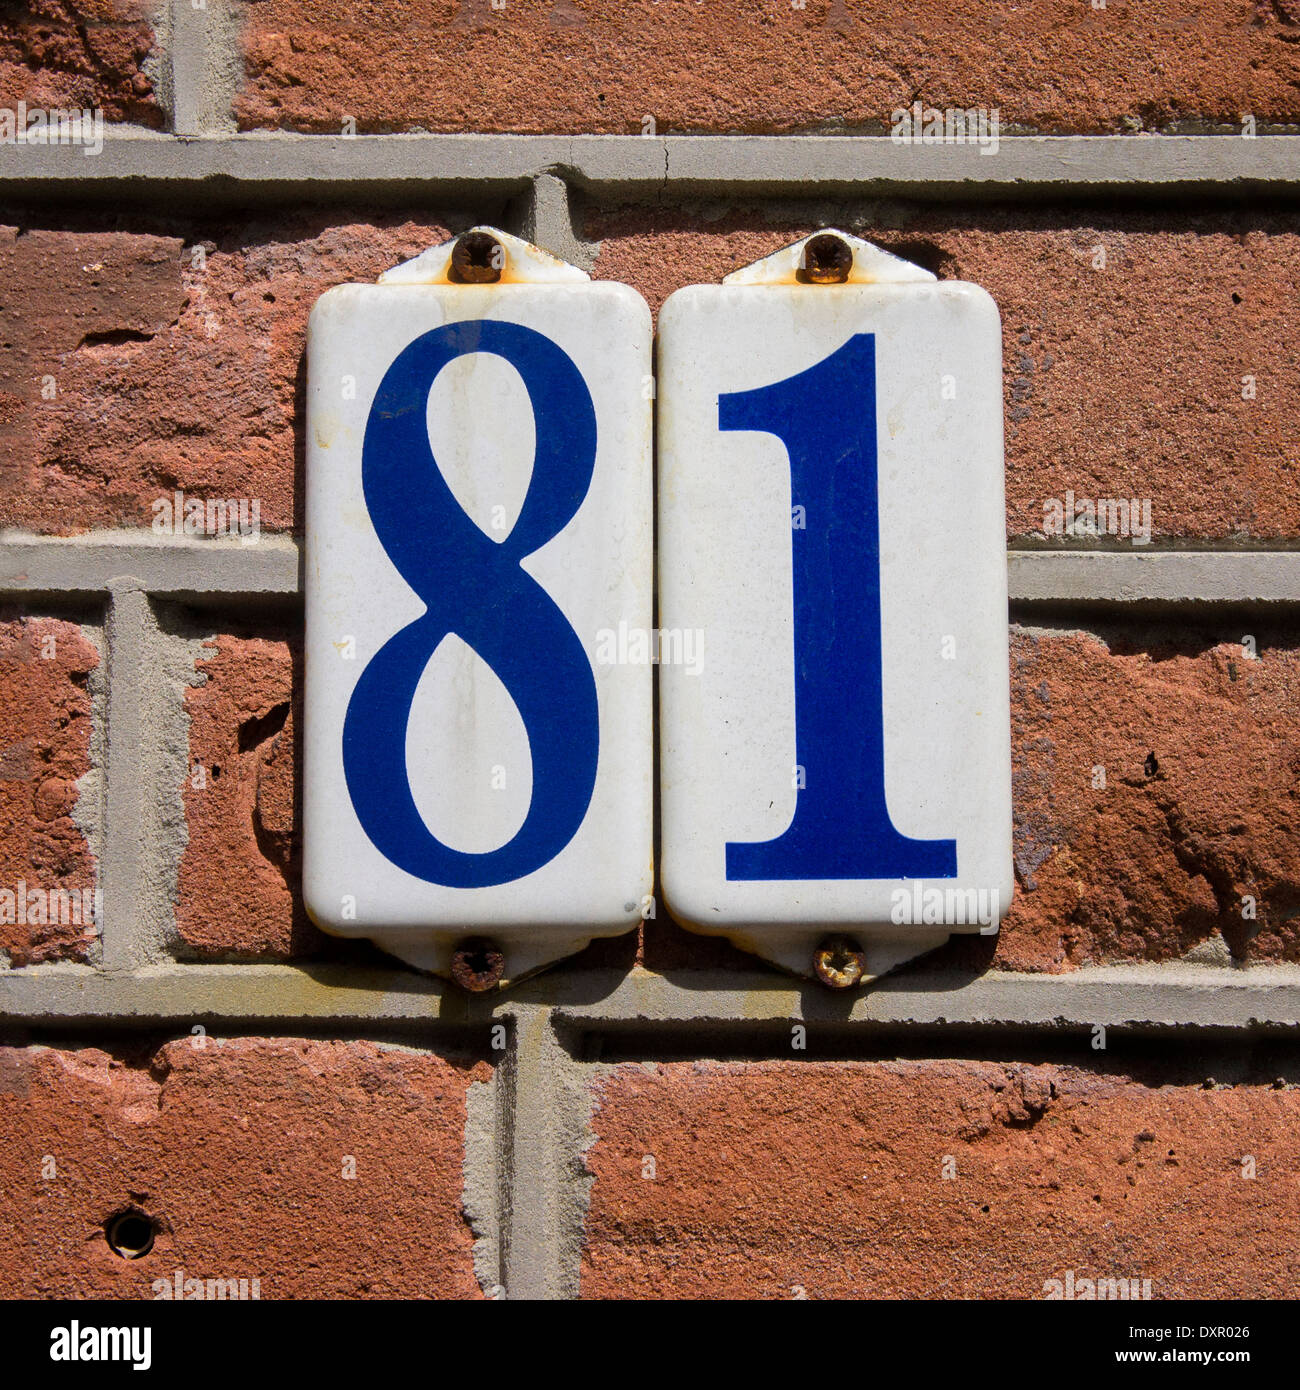 enameled house number eighty one. Blue lettering on a white background. Stock Photo